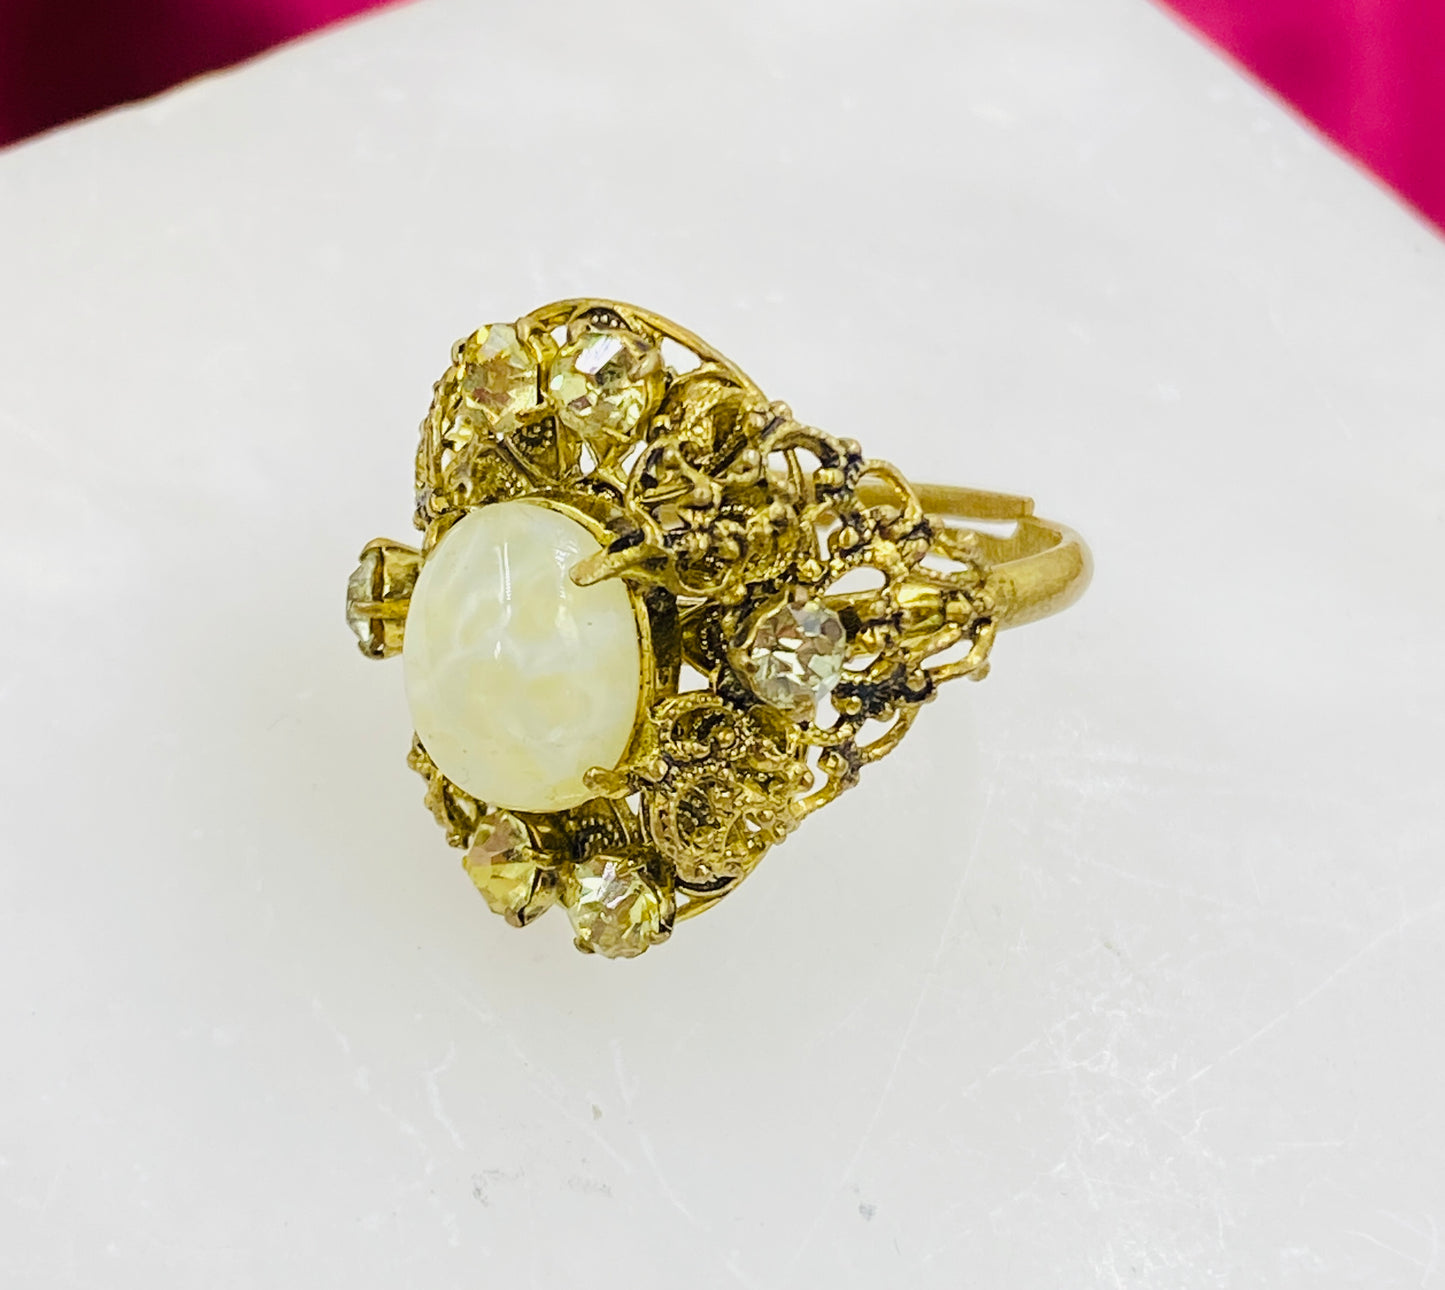 Gold Tone Edwardian-Style Ornate Oval Agate Ring 